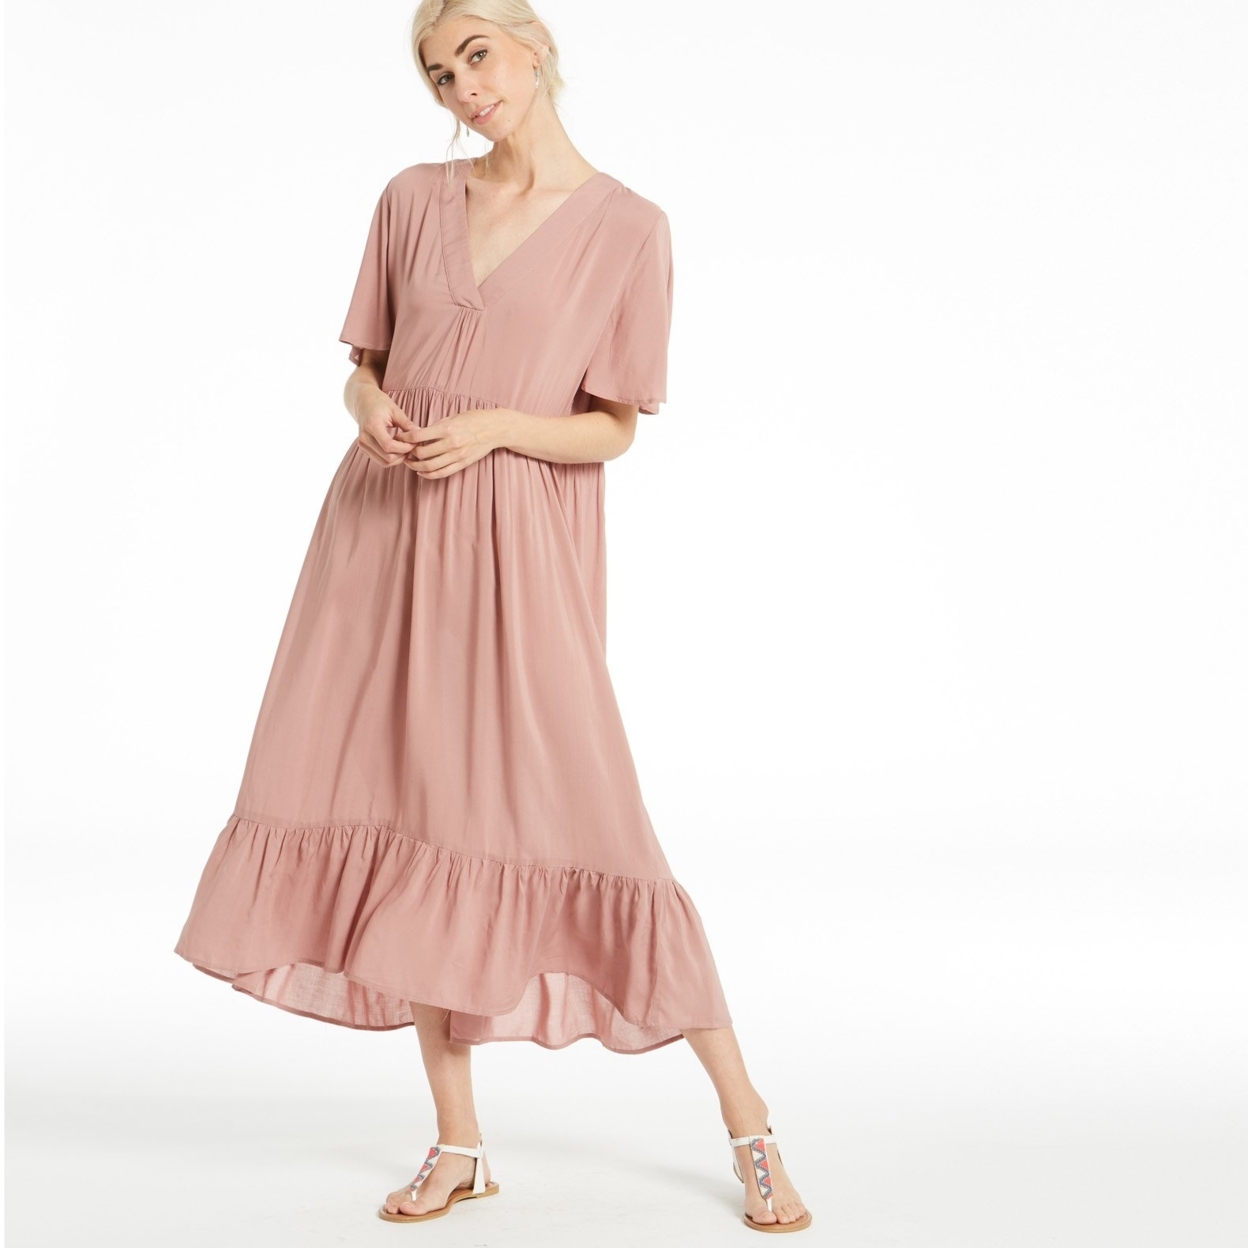 Free As The Wind Midi Dress - Rose, Small (2-4)